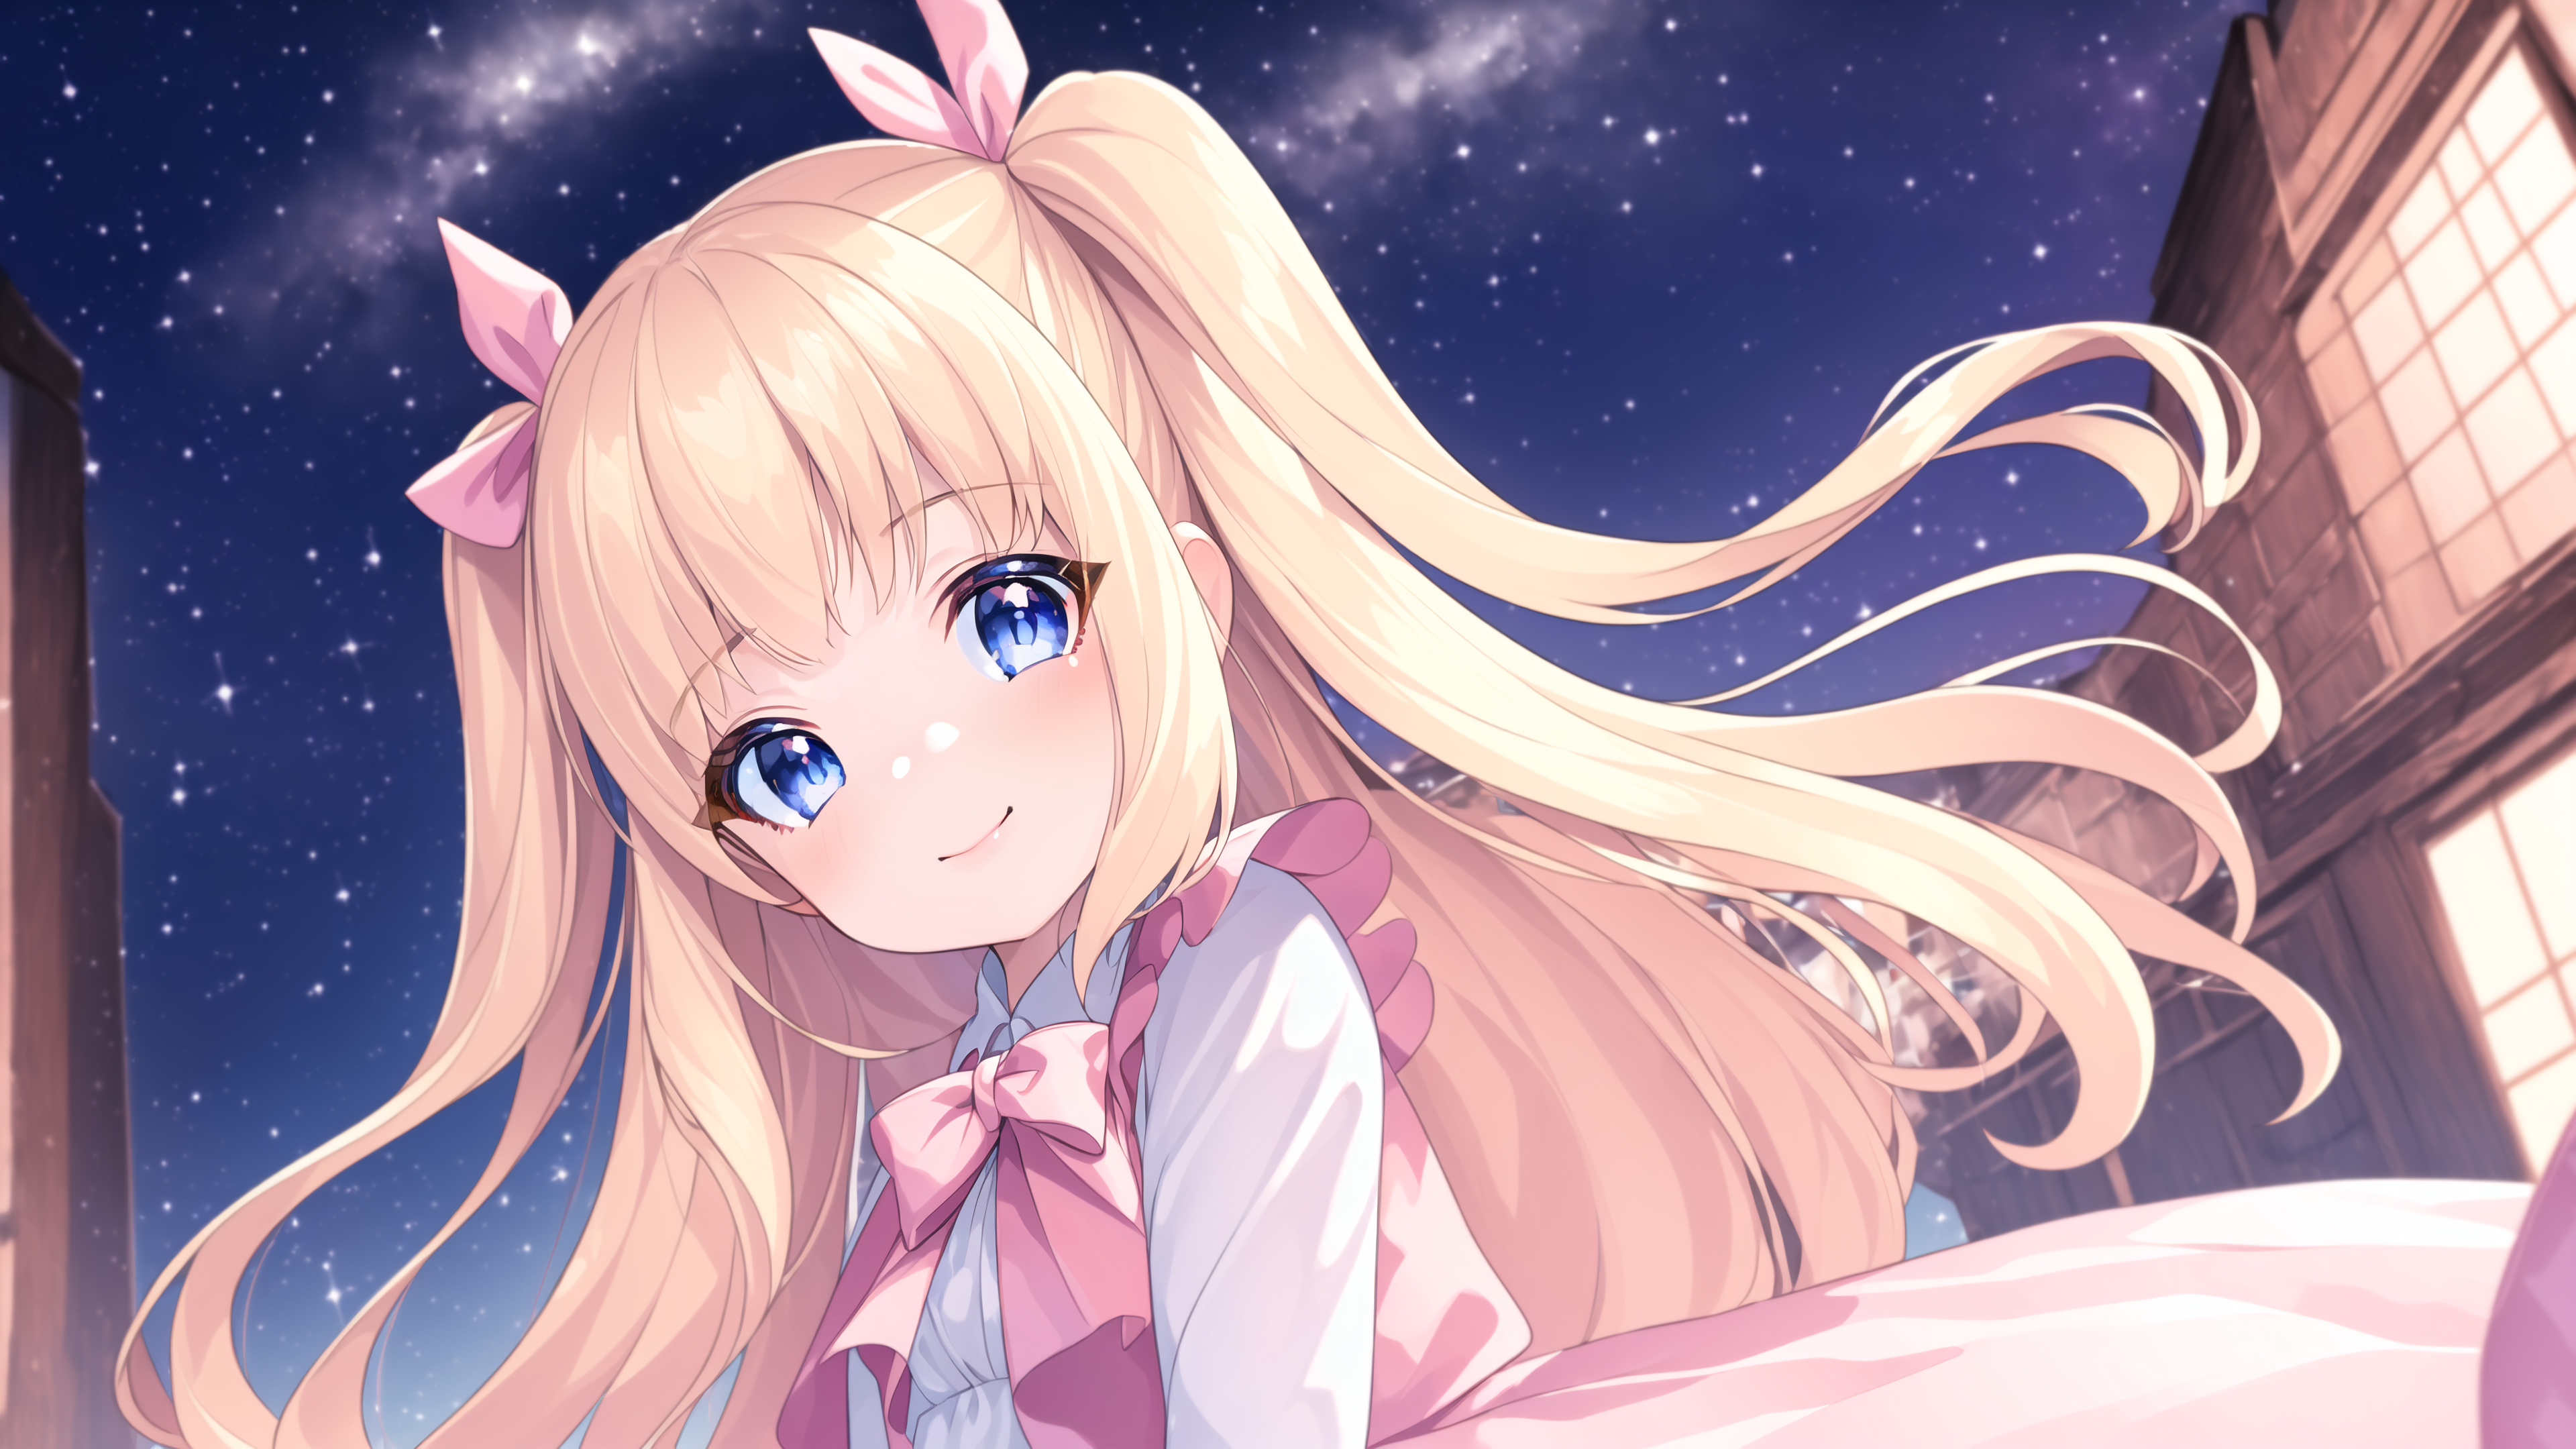 4k Blond Girl Wallpaper Collection 3 Stargazing Together Aipictors